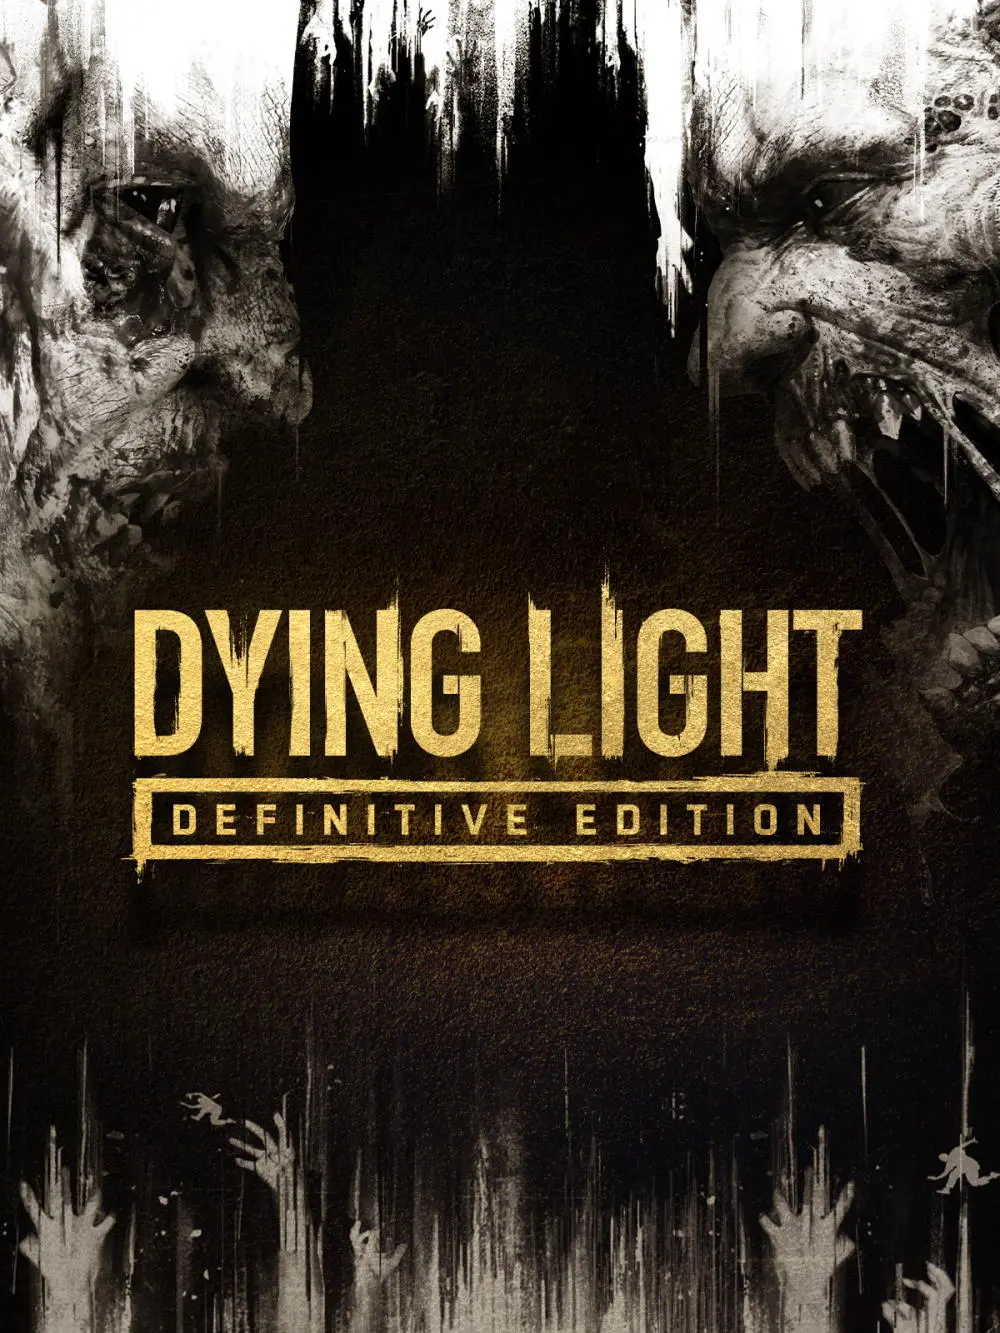 Dying Light: Definitive Edition (TR) (Xbox One / Xbox Series X|S) - Xbox Live - Digital Code